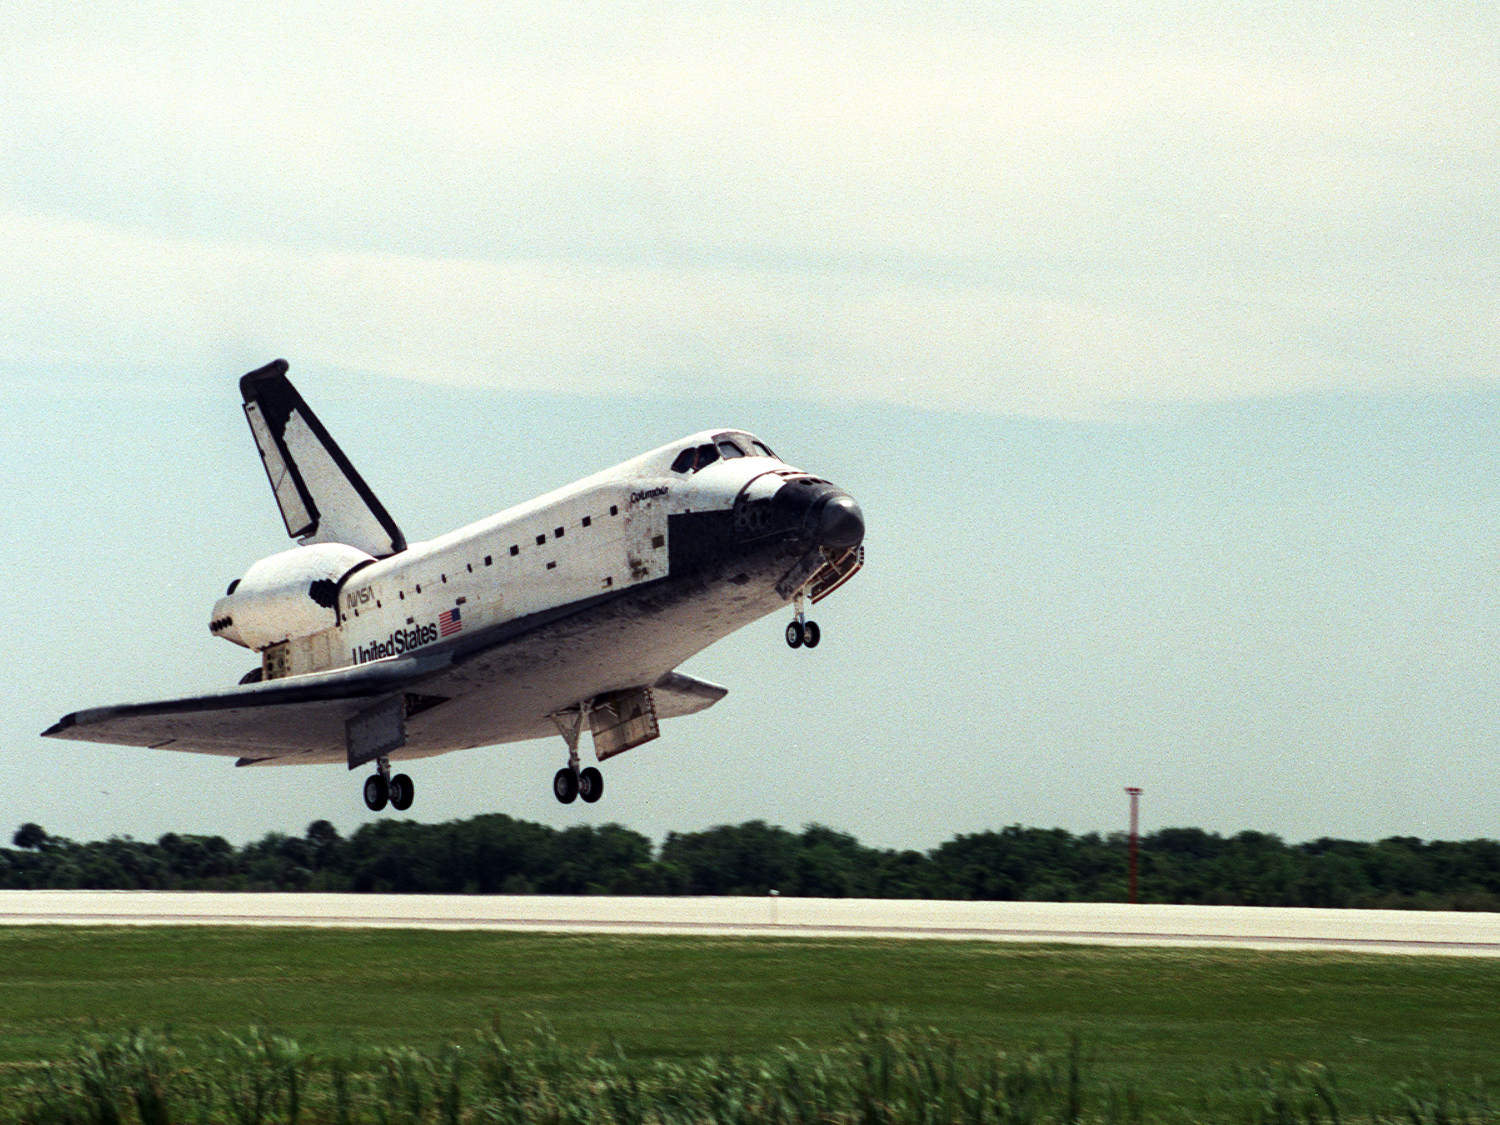  Landing of Columbia at conclusion of STS-83 mission on April 8, 1997. 